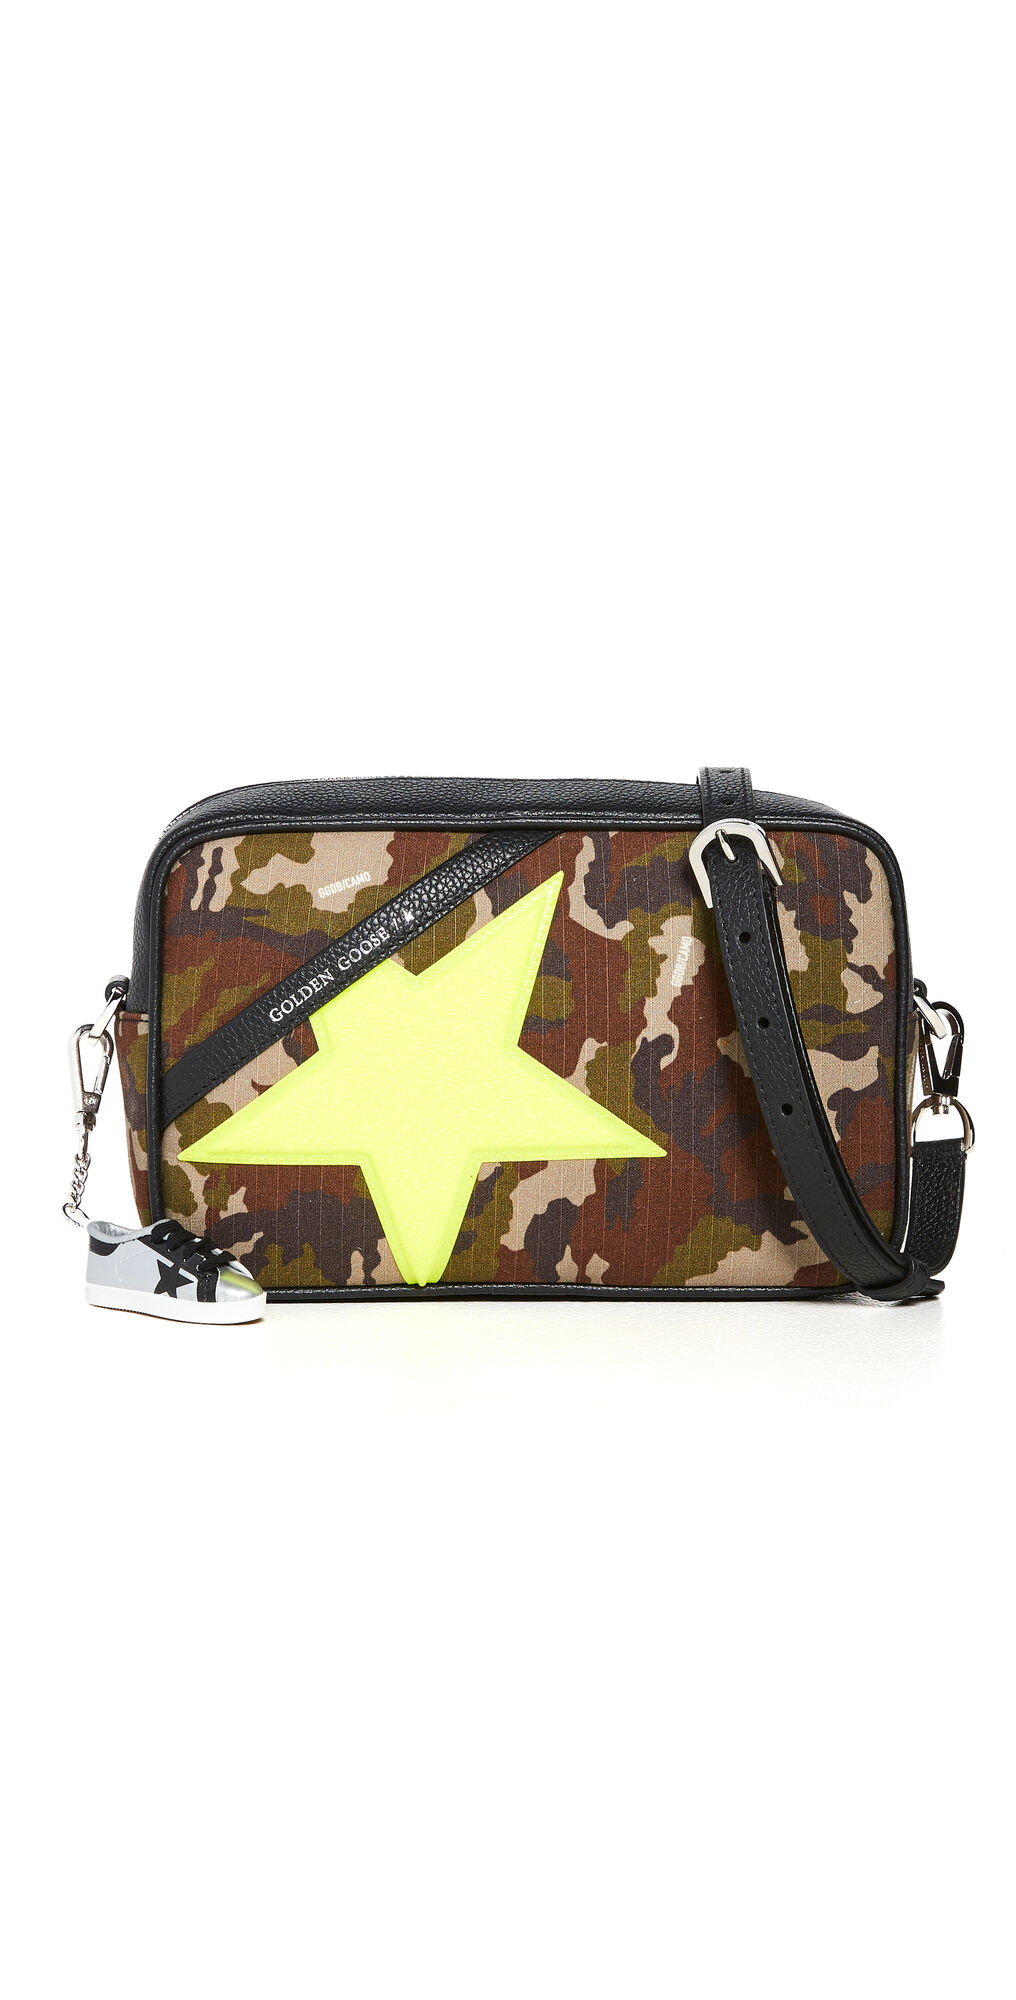 Golden Goose Star Bag Camouflage/Fluo Yellow/Black One Size  Camouflage/Fluo Yellow/Black  size:One Size